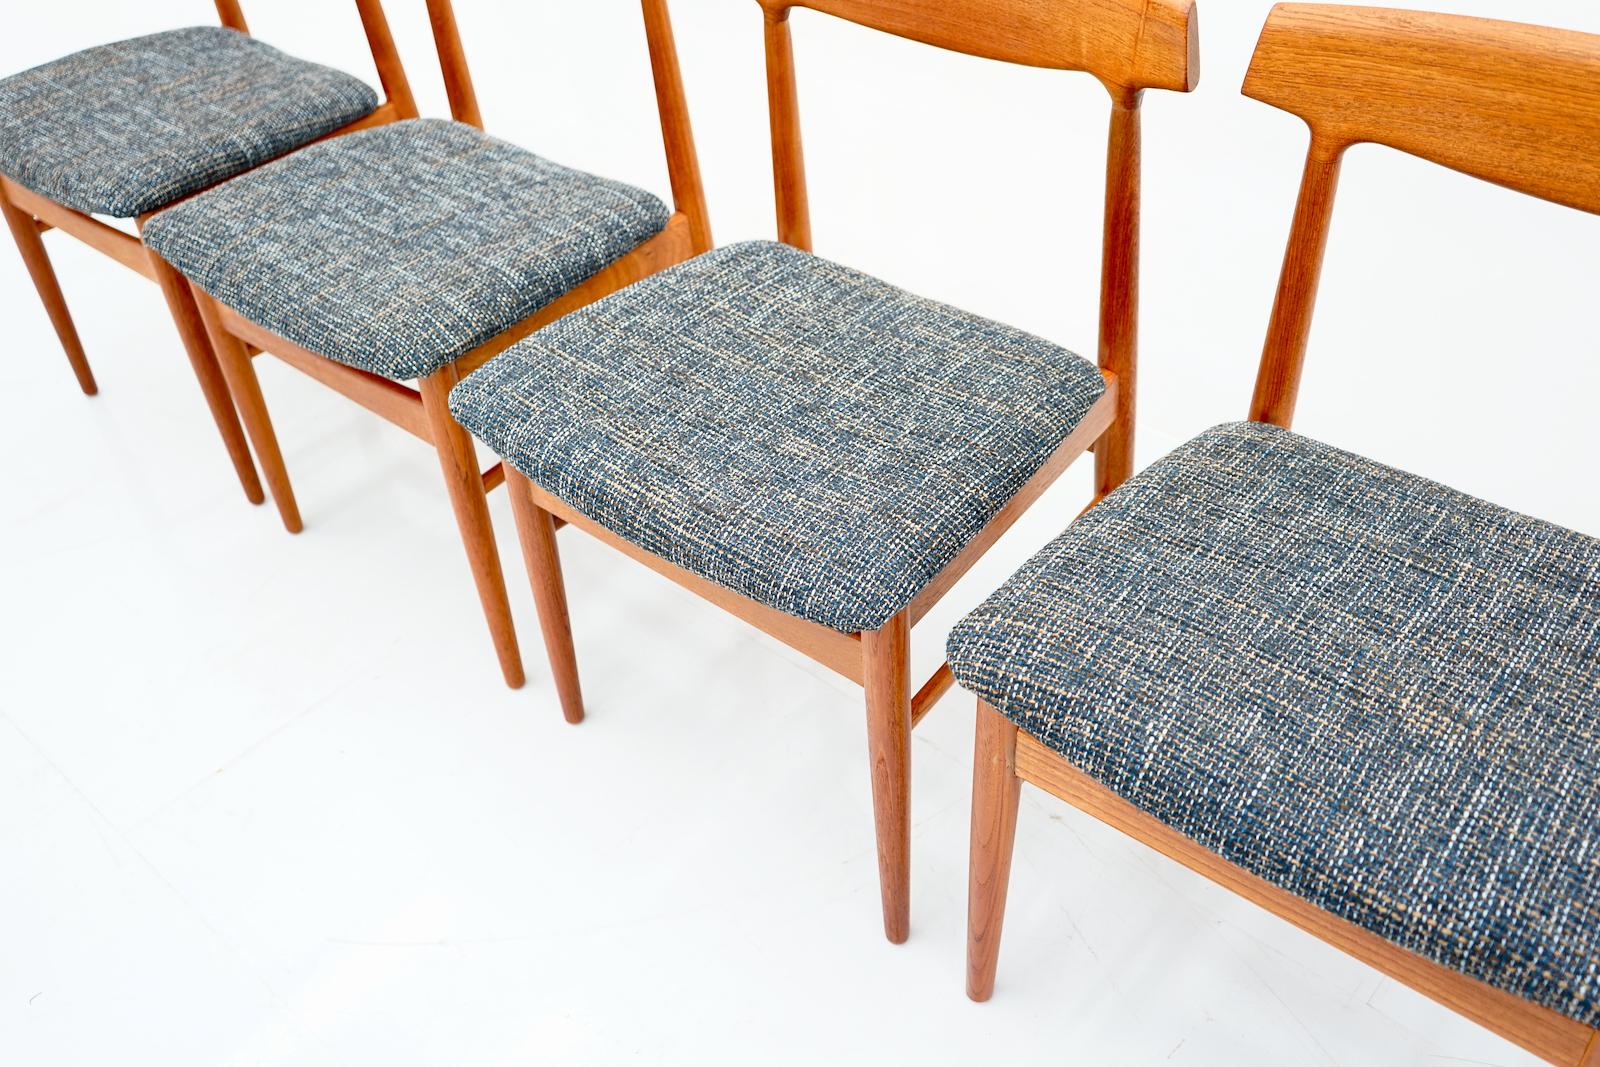 Fabric Set of Four Teak Wood Dining Chairs Mod. 60 by Henning Kjaernulf, 1960s For Sale